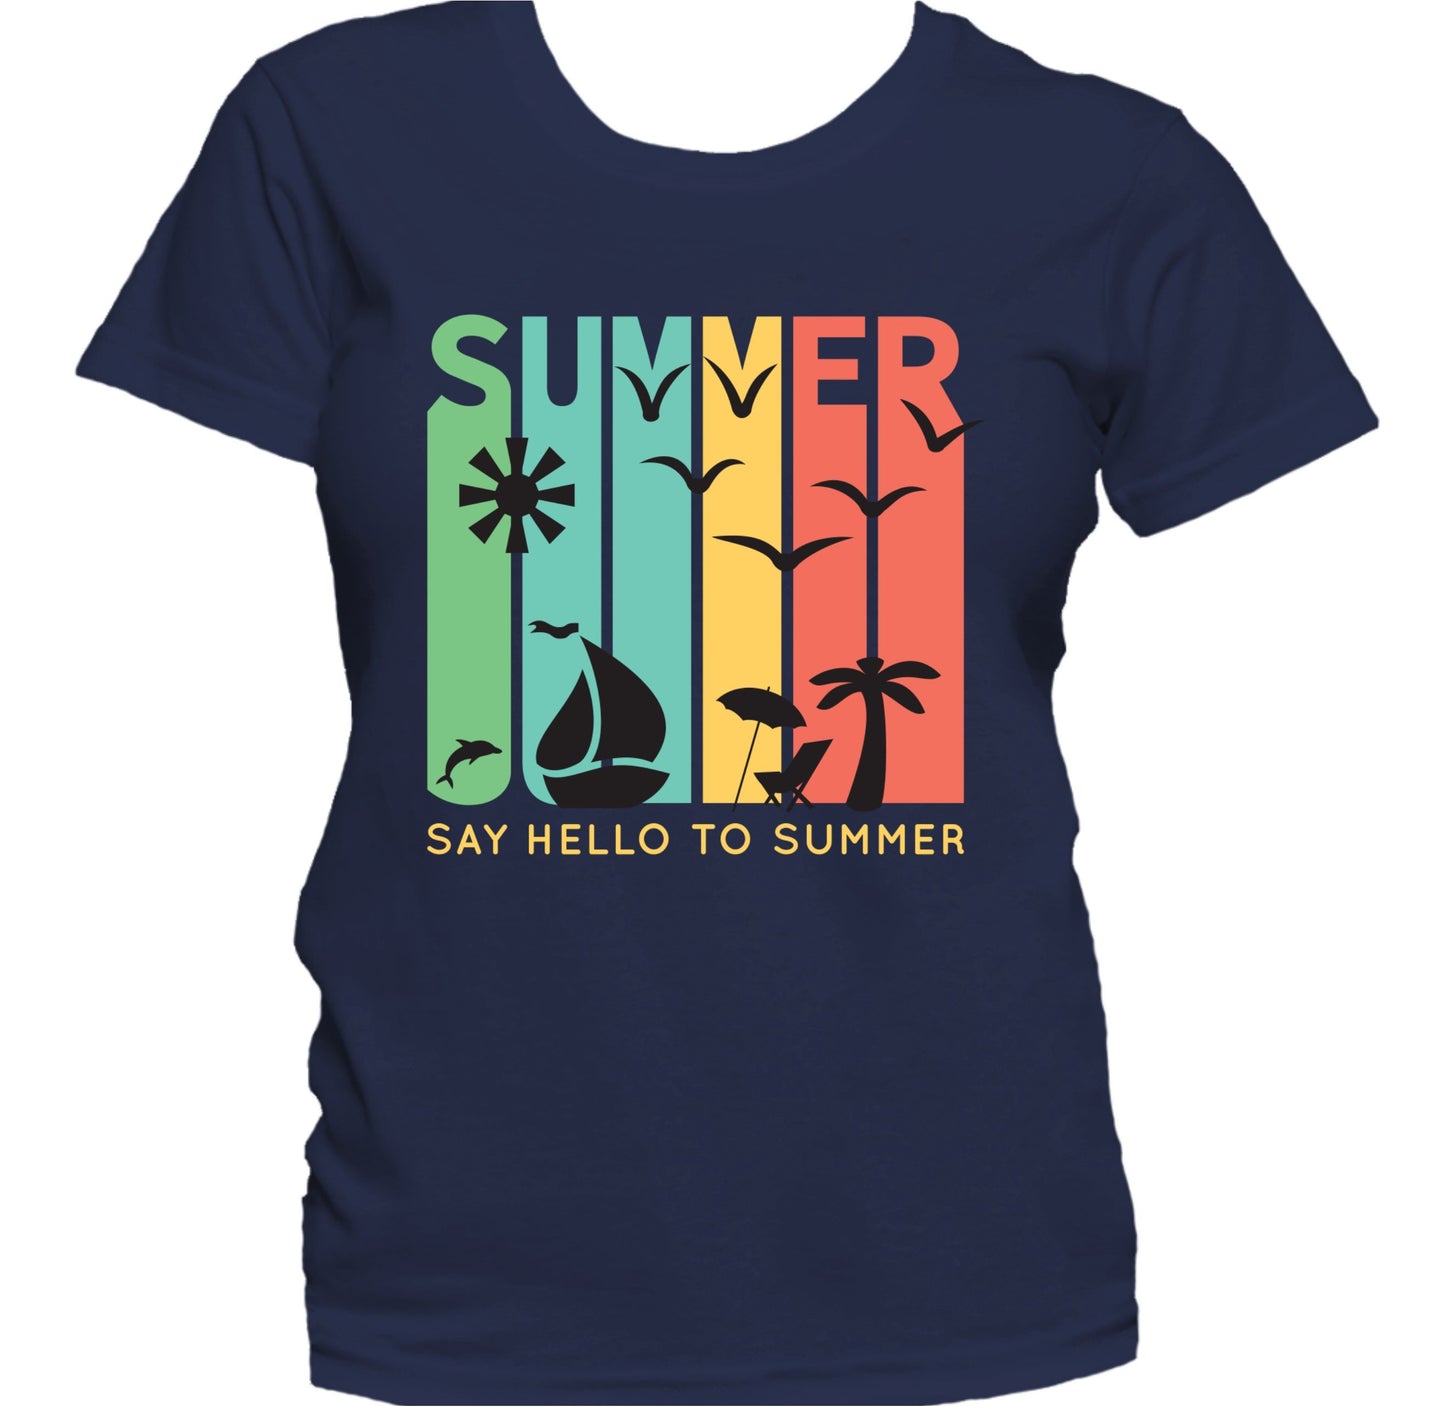 Vintage Retro Say Hello To Summer 1970's Style Women's T-Shirt 